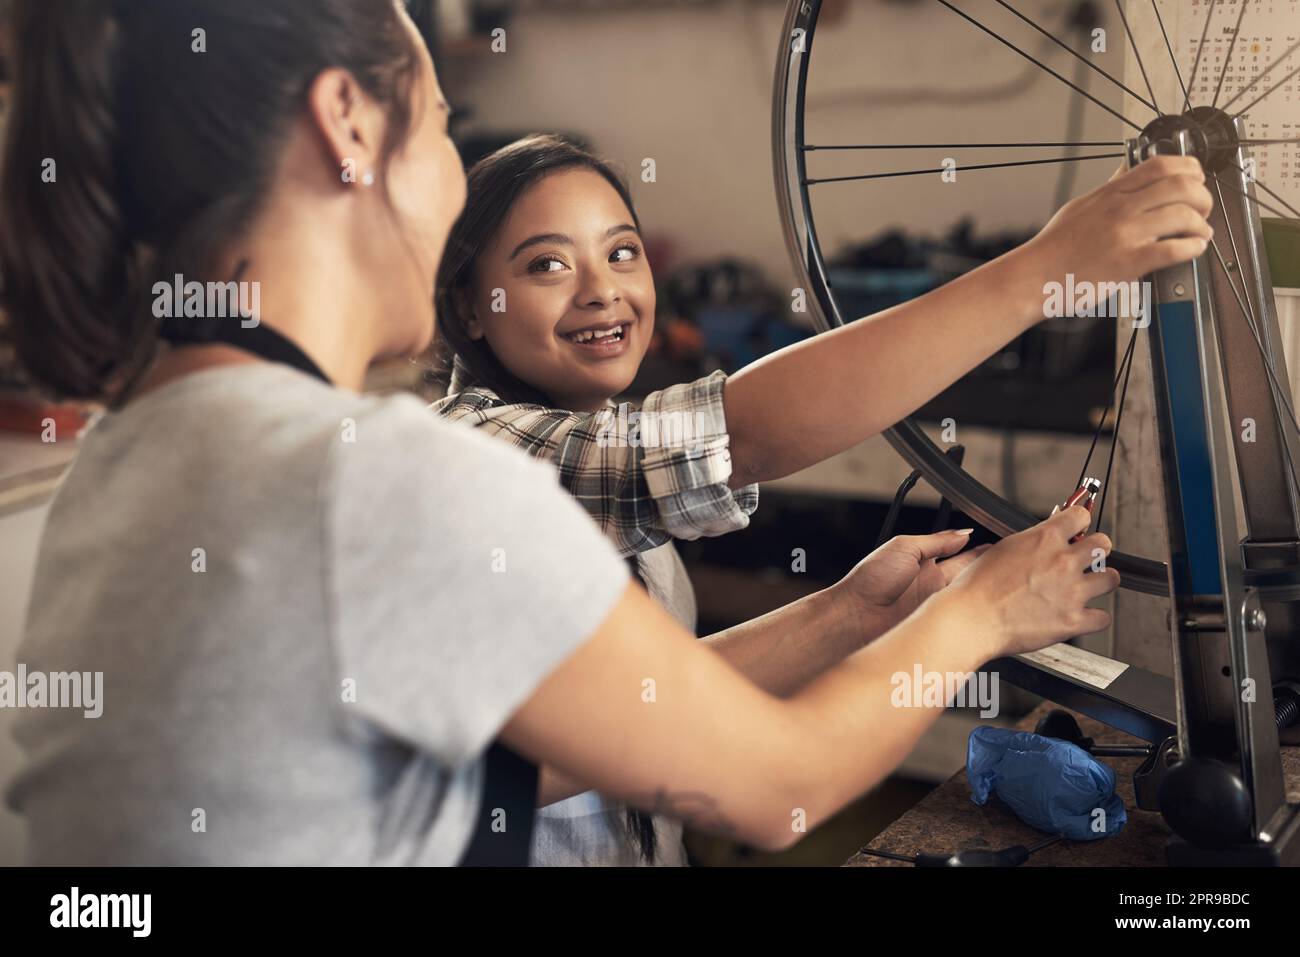 A tomboy is the heart of every princess. two young female workers fixing a bike at a bicycle repair shop. Stock Photo